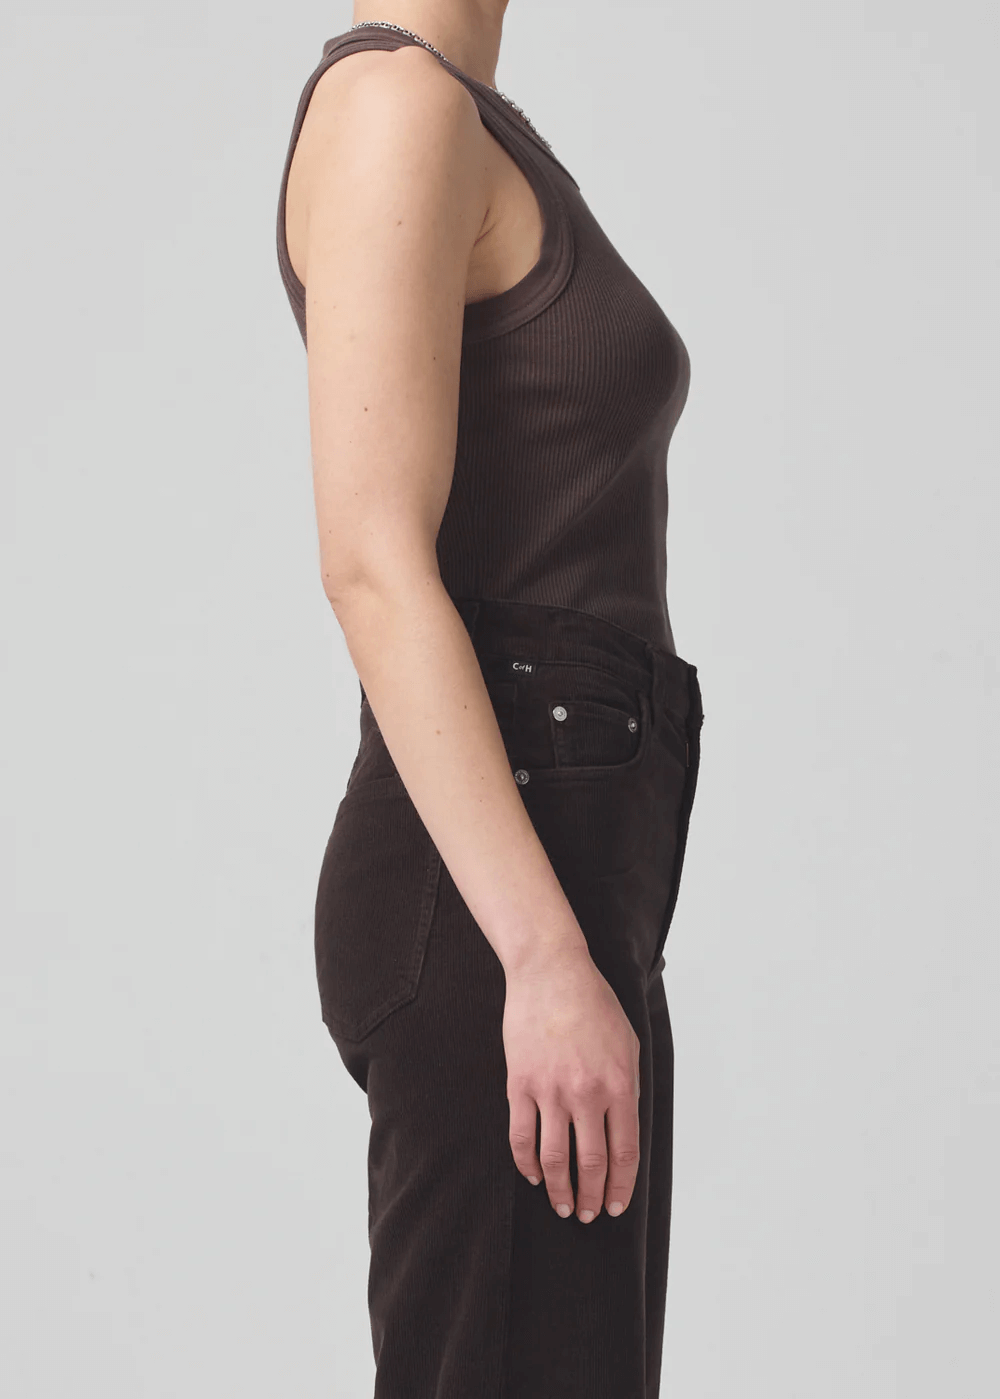 CITIZENS OF HUMANITY Isabel Rib Tank in Fig brown available at TNT The New Trend Australia.